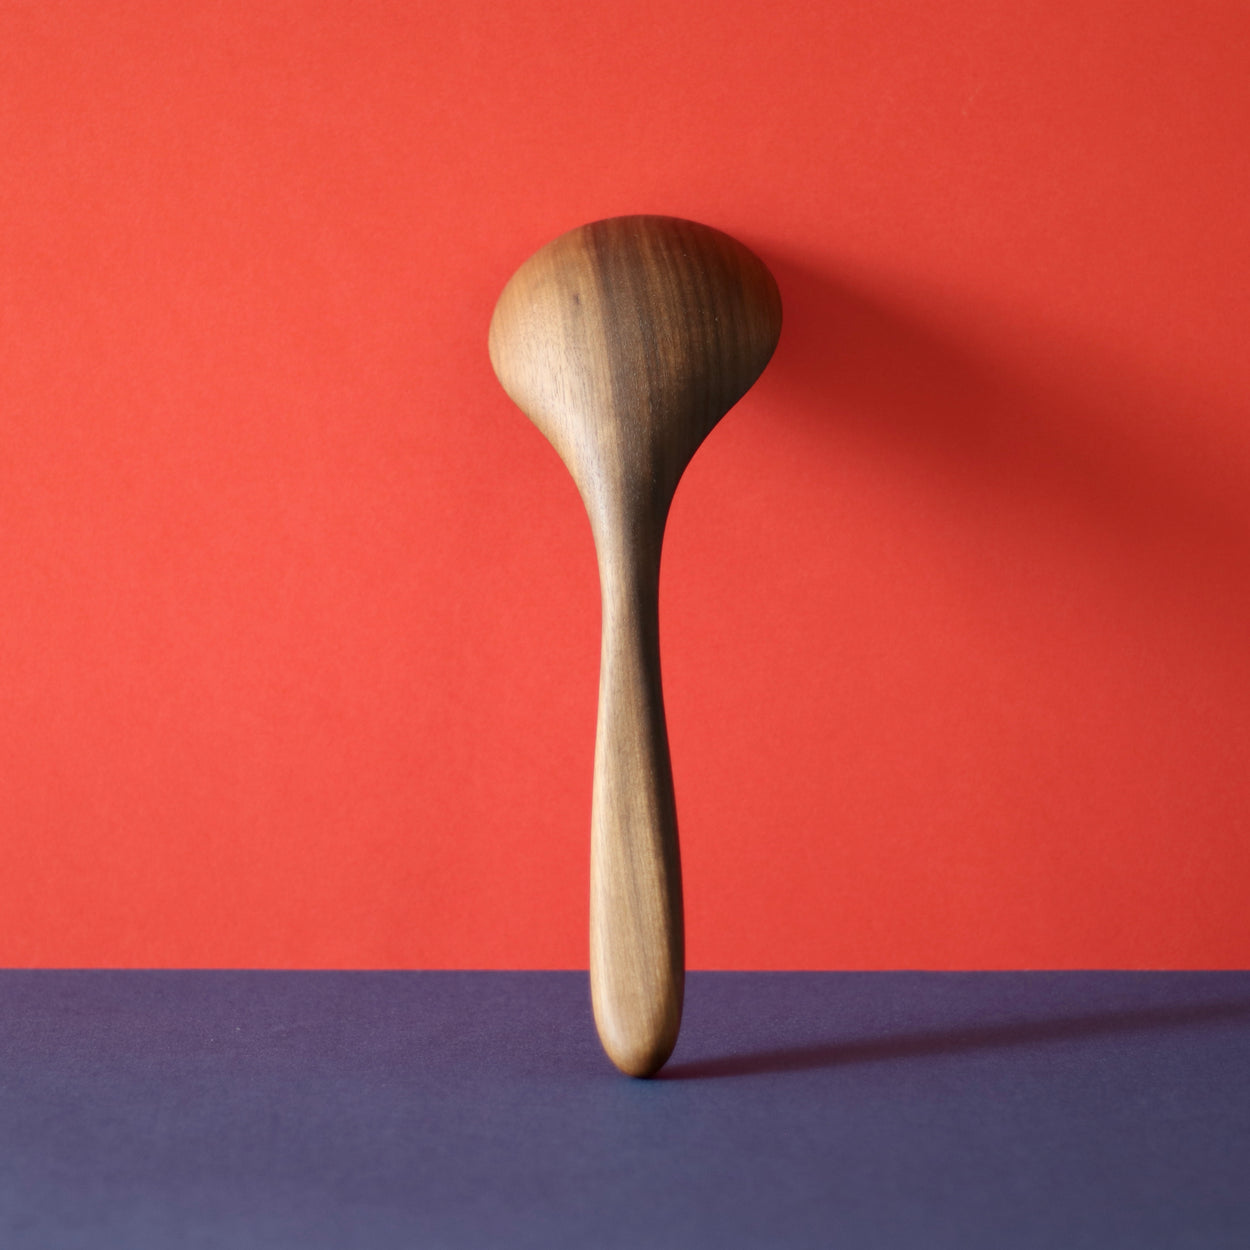 Back view of Handmade Walnut Wood Soup Ladle with red and blue background